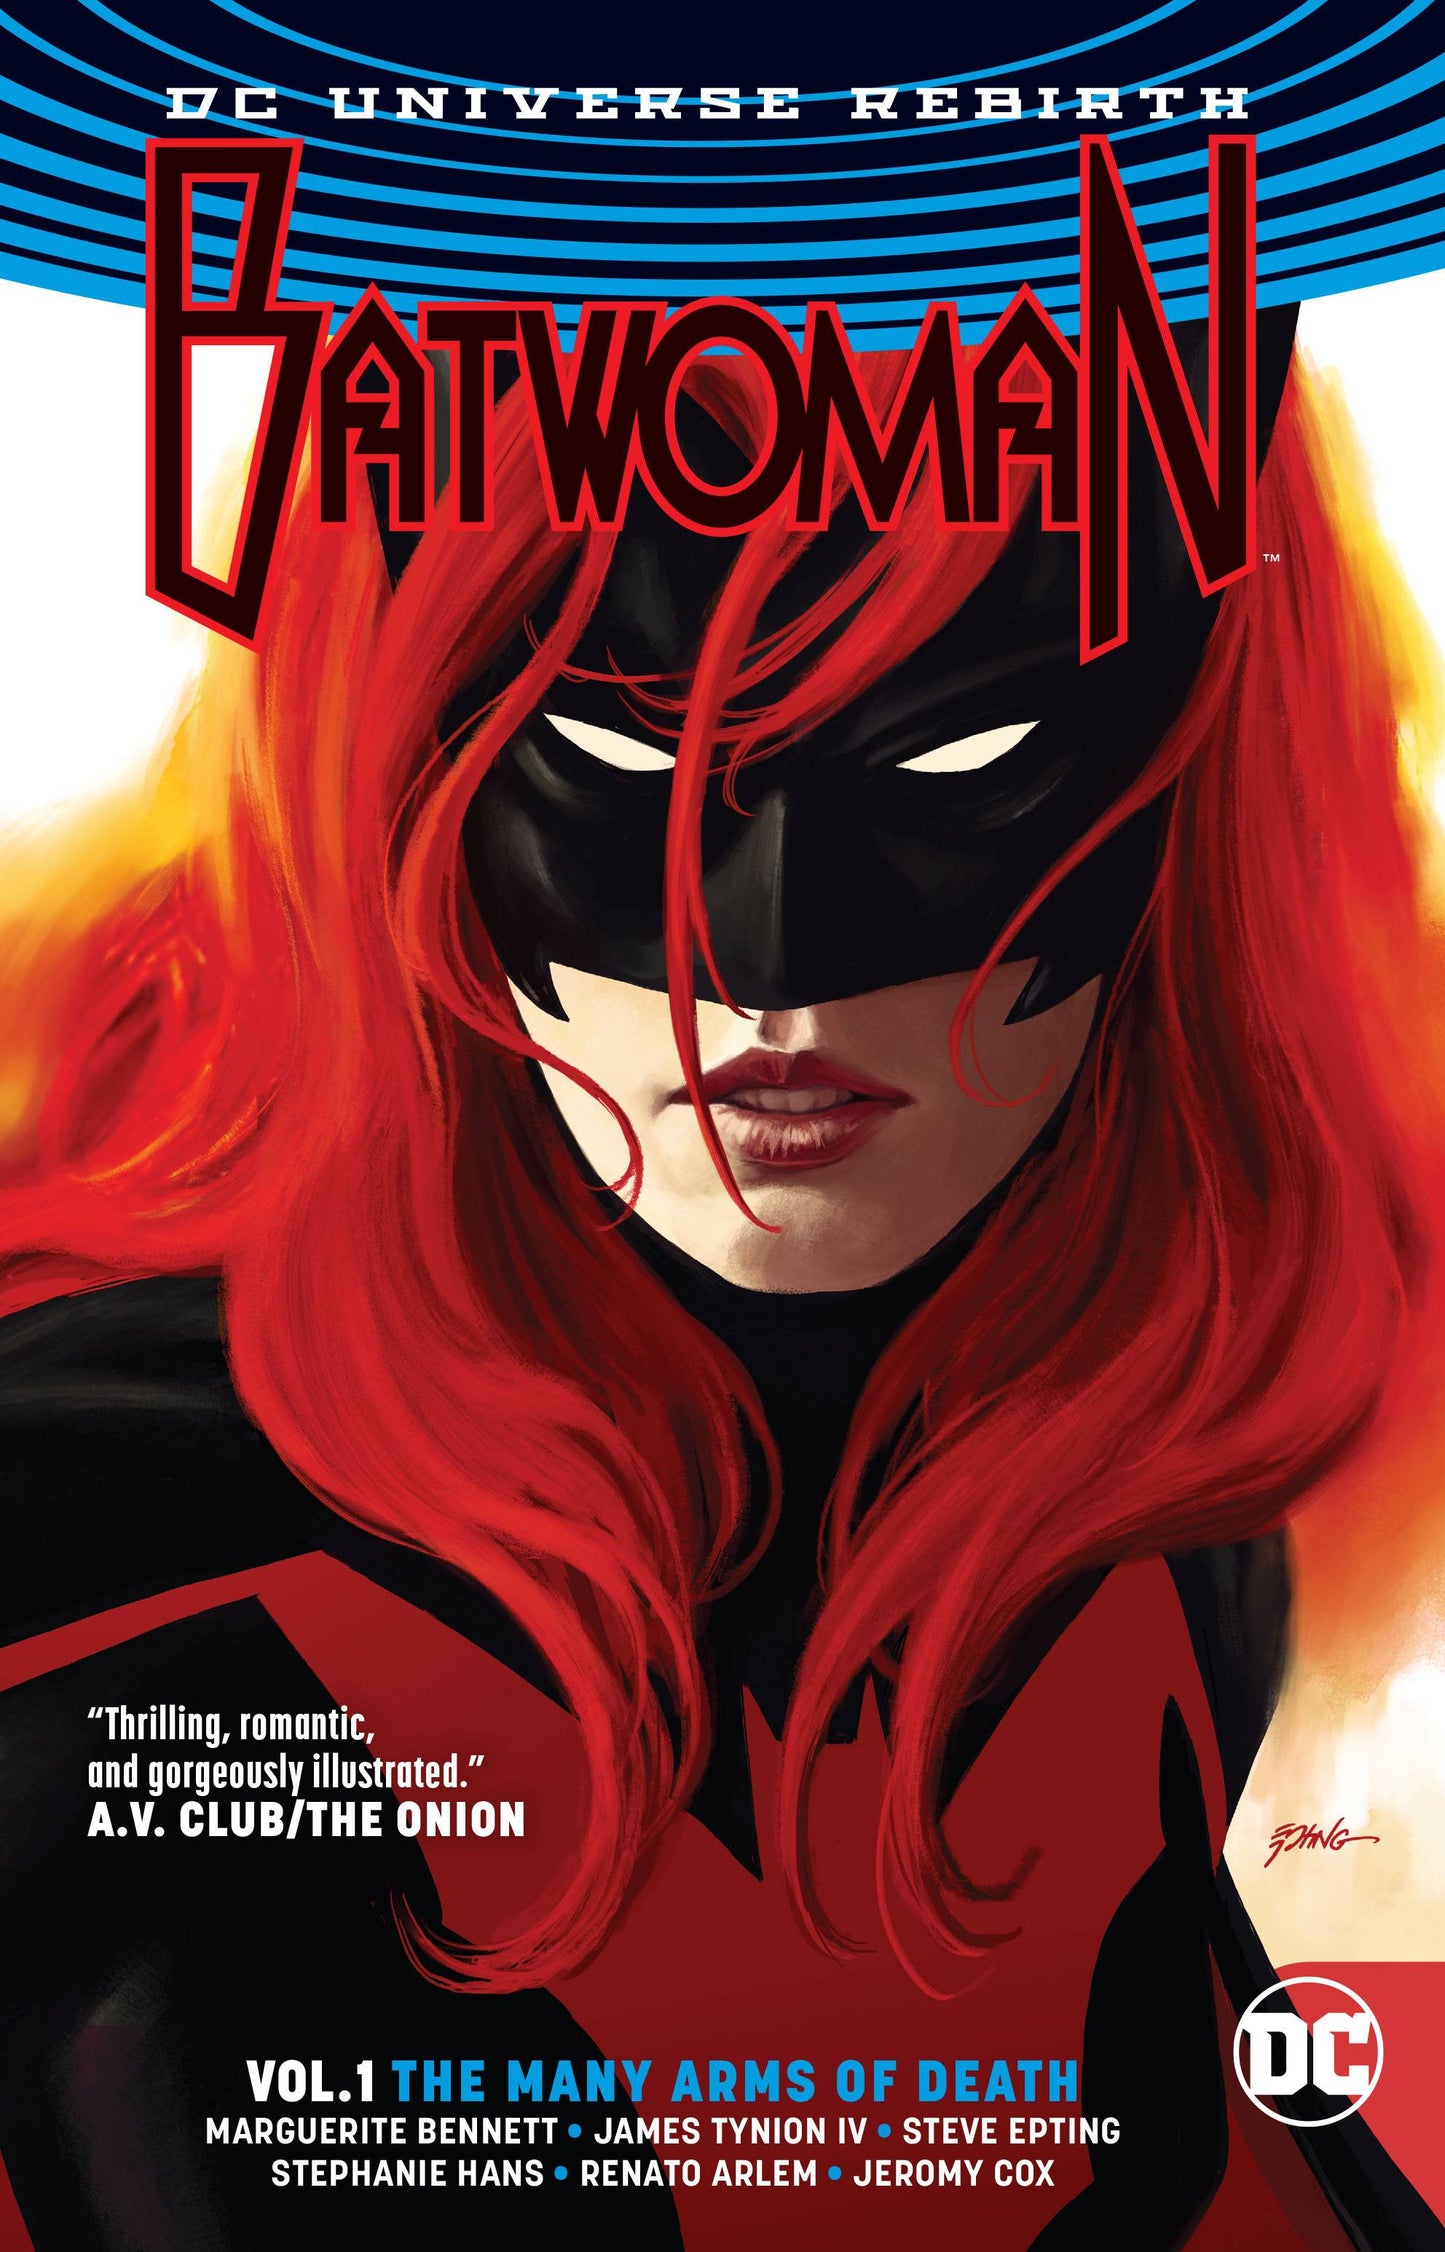 Batwoman Vol 01 The Many Arms Of Death (Rebirth)